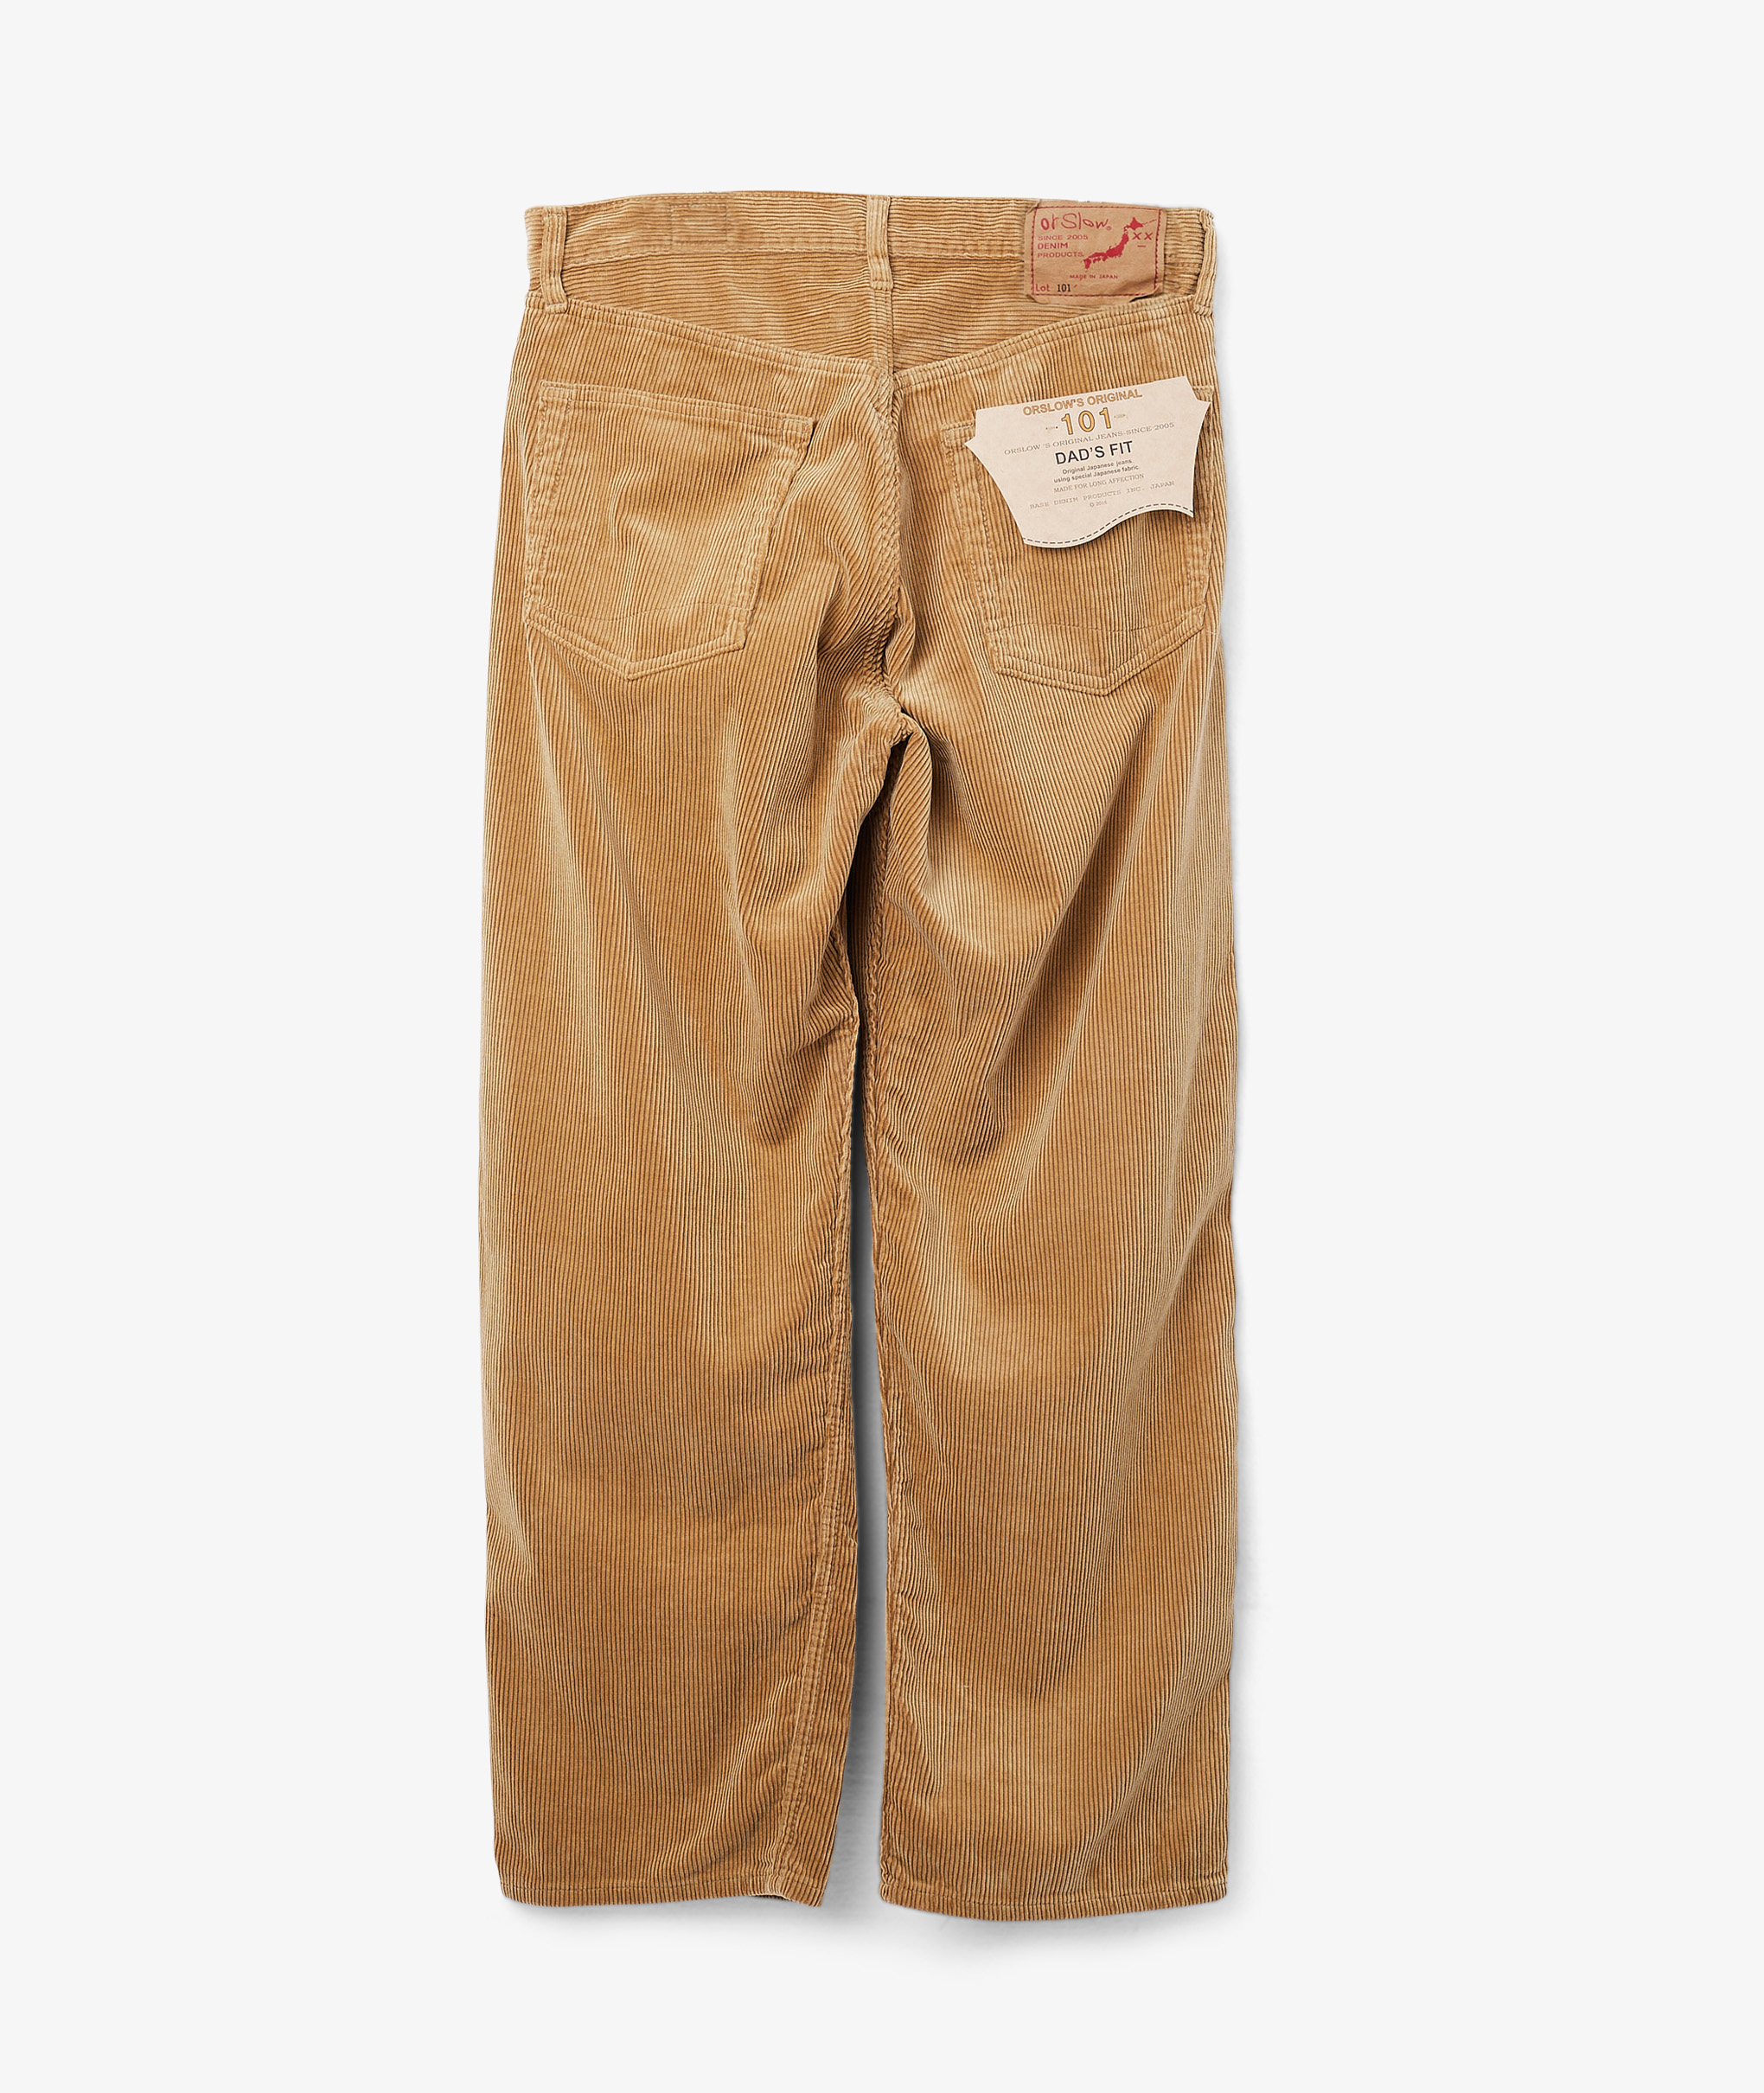 Norse Store | Shipping Worldwide - orSlow 101 DAD'S FIT CORDUROY PANTS ...